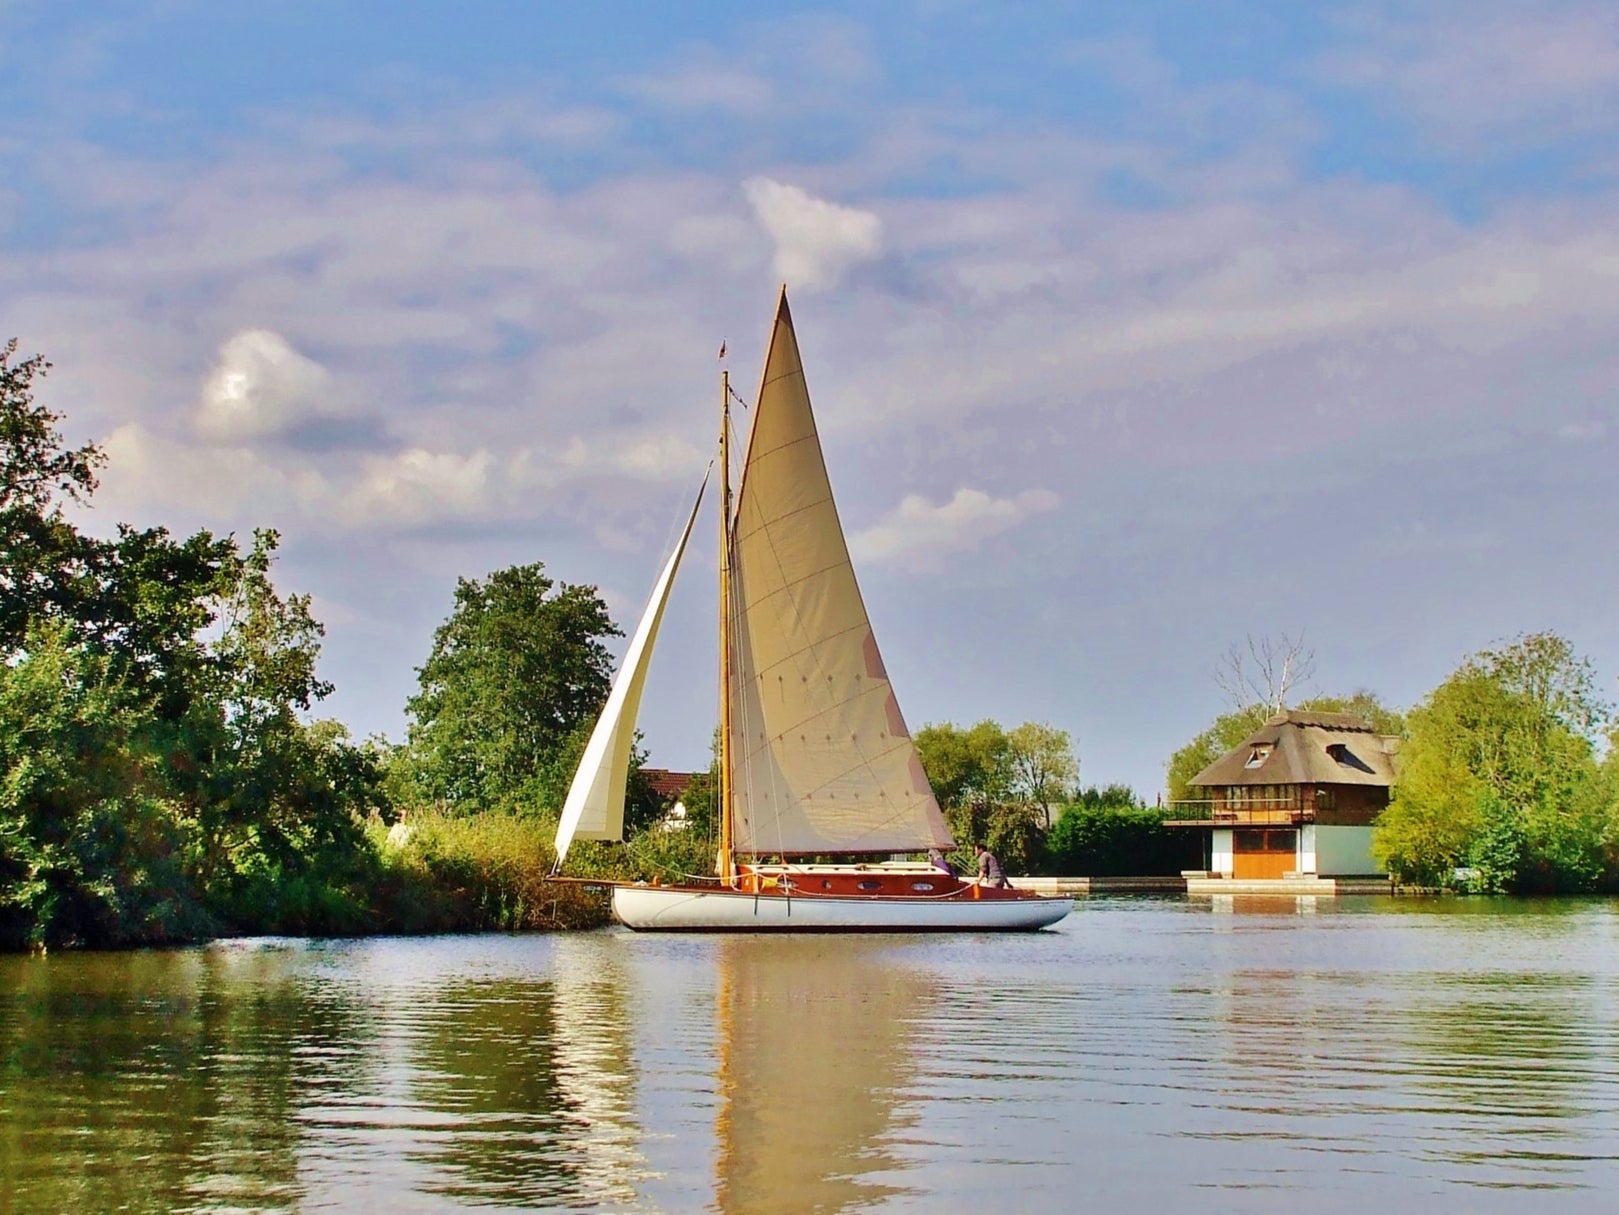 The group of friends had hired a boat and were sailing along the River Bure in Norfolk